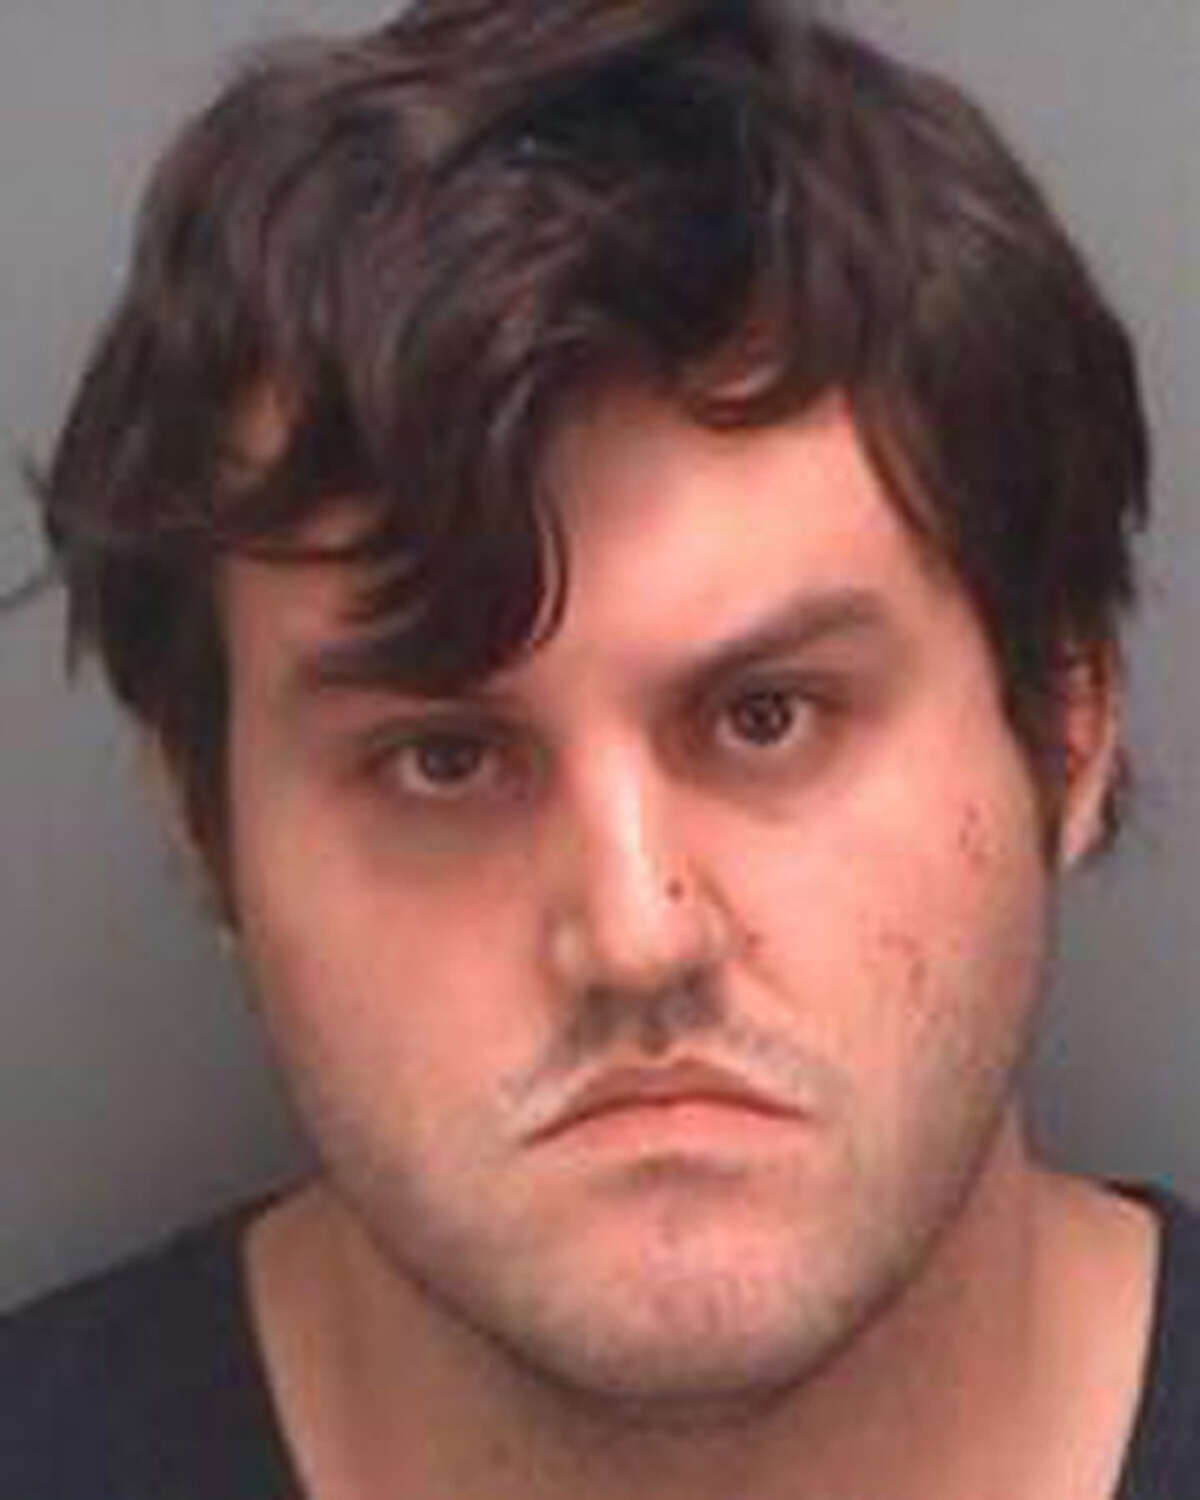 This image provided by the Pinellas County Jail shows a booking photo of John Nicholas Jonchuck Jr. The 25 year-old faces a first-degree murder charge after throwing his 5-year-old daughter off a bridge on the approach to the Sunshine Skyway early Thursday morning Jan. 8, 2015.